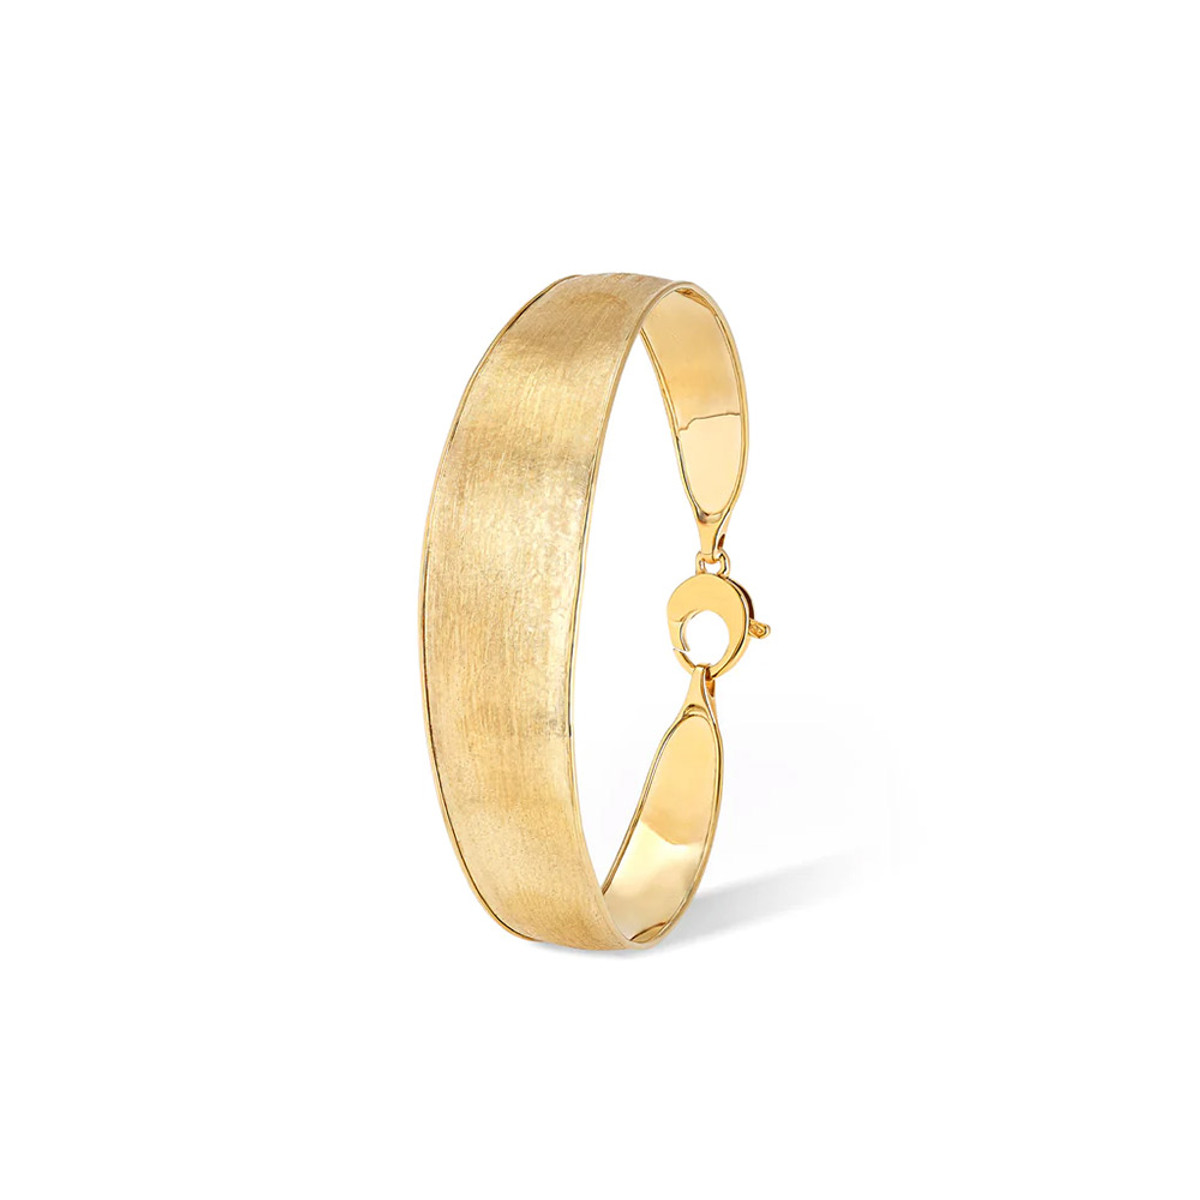 Marco Bicego 18K Yellow Gold Lunaria Collection Medium Width Bangle-44673 Product Image